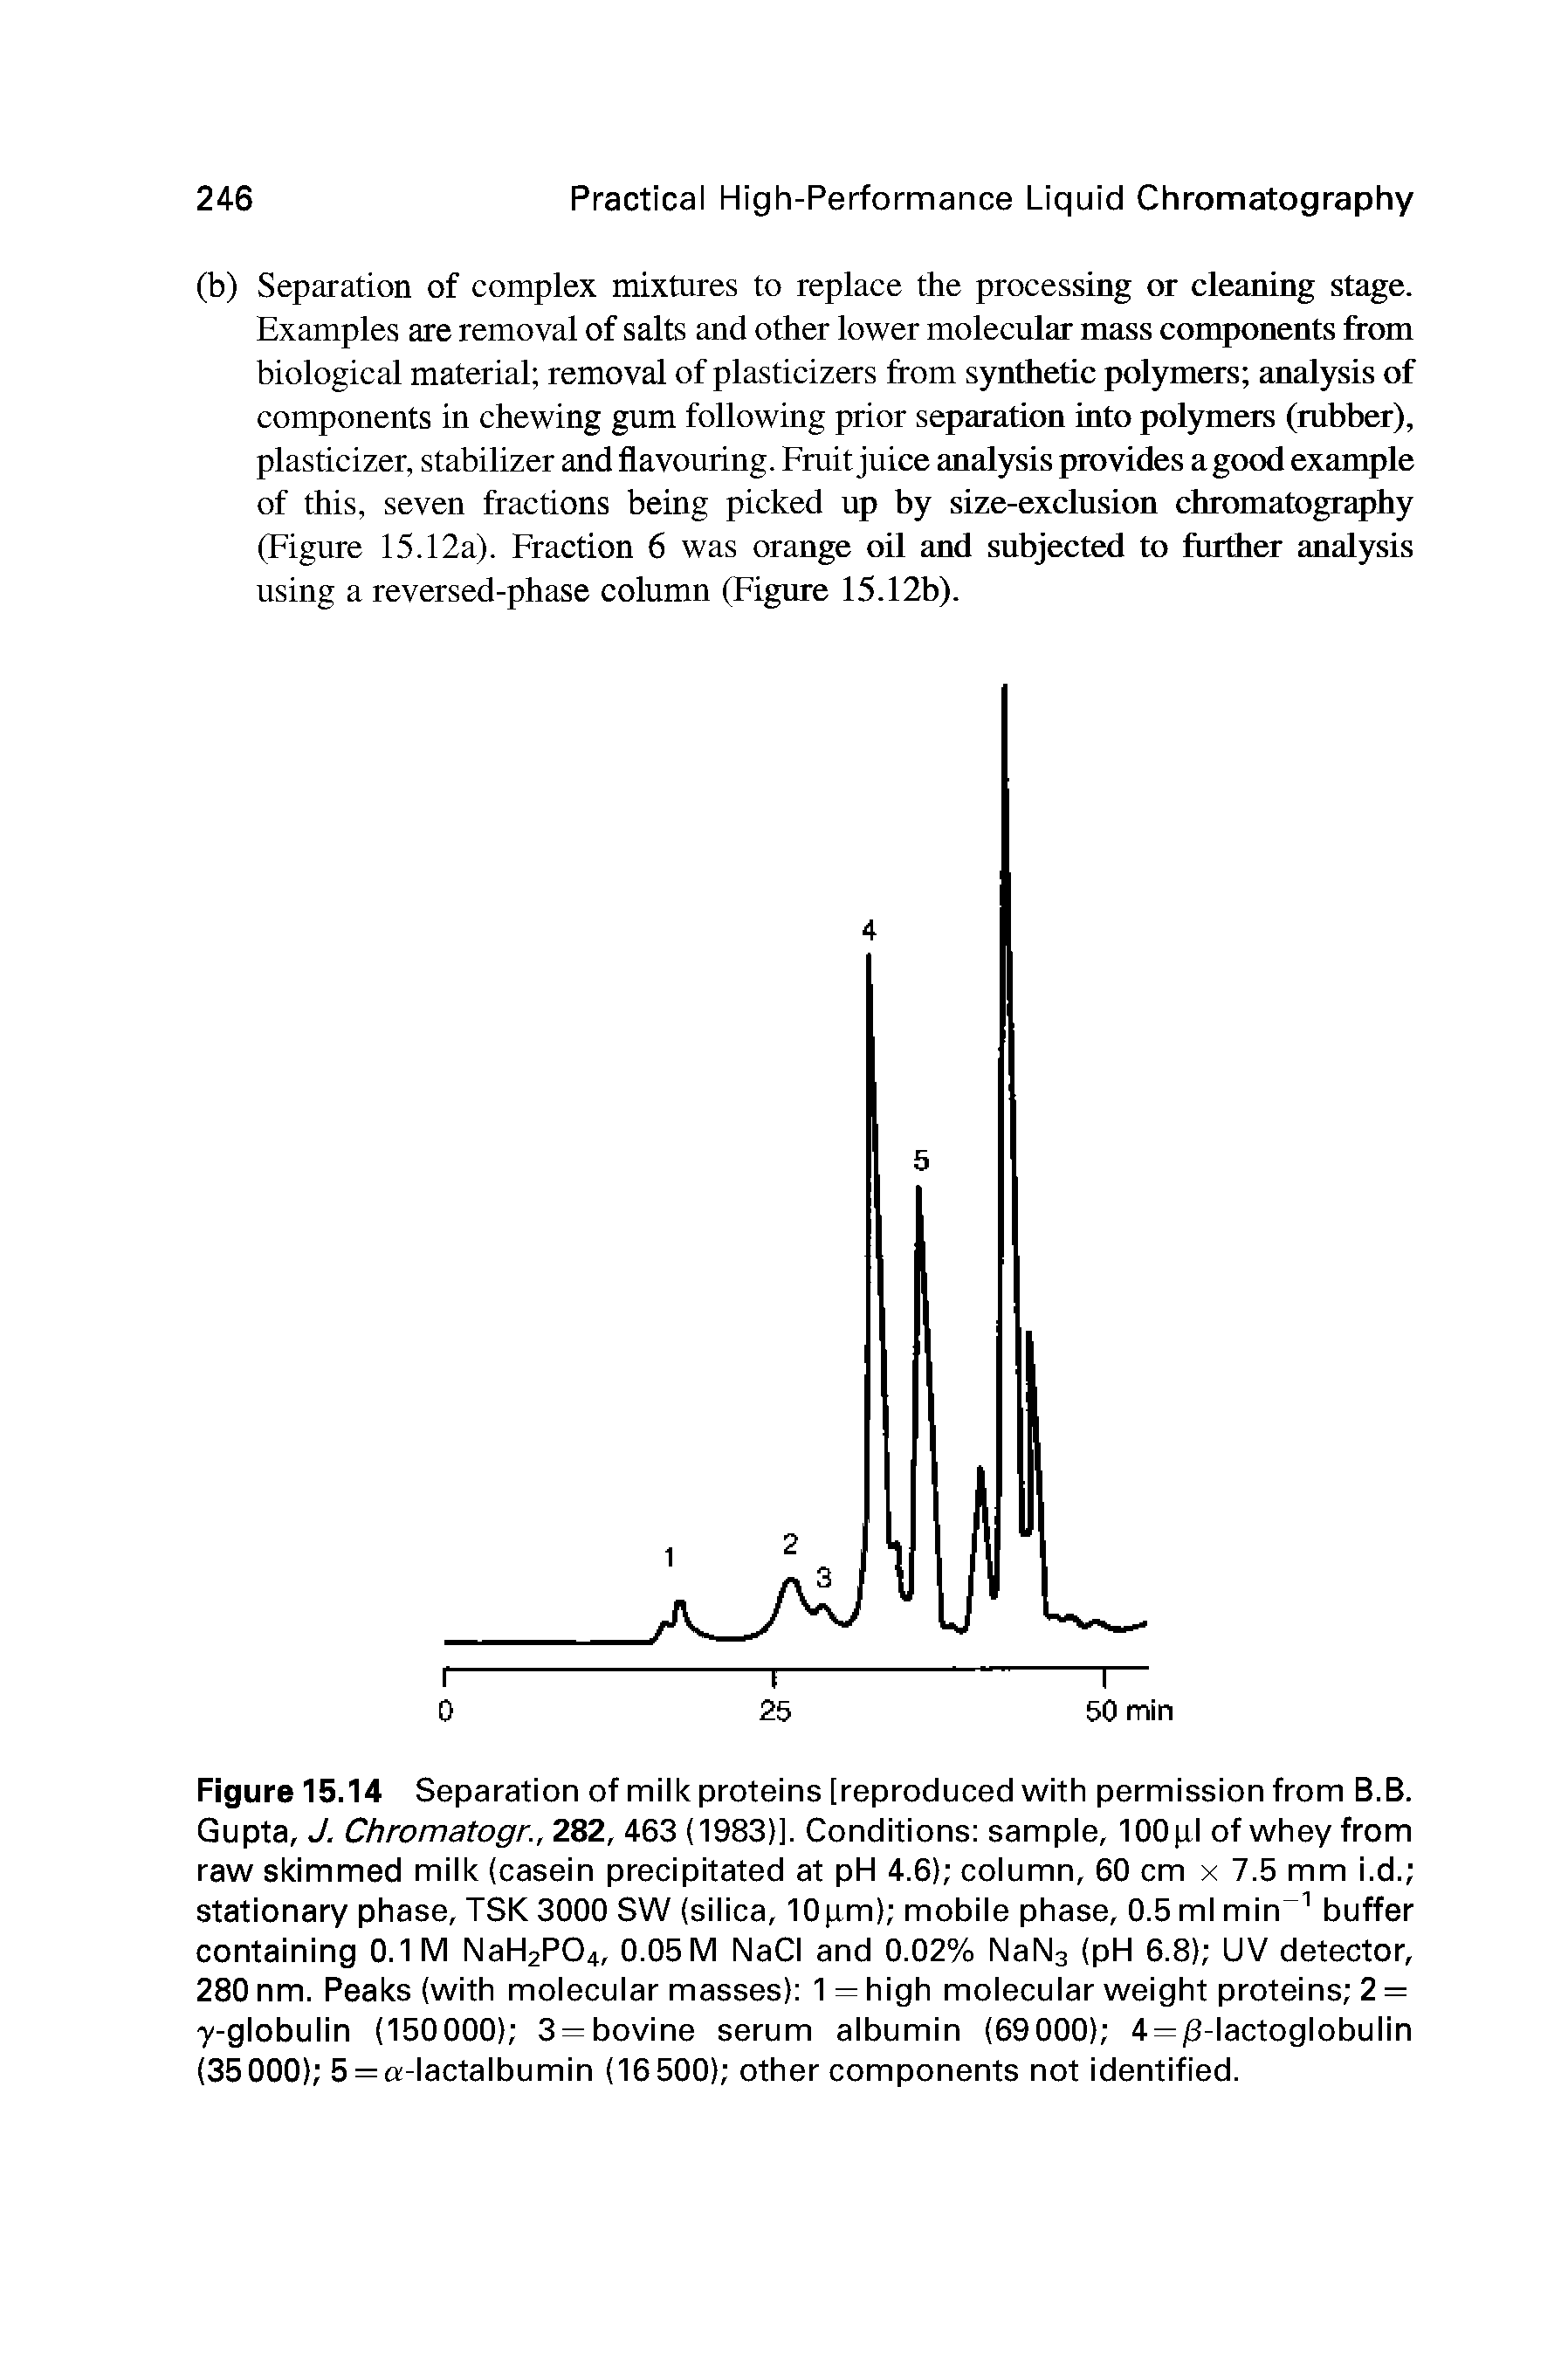 Figure 15.14 Separation of milk proteins [reproduced with permission from B.B. Gupta, J. Chromatogr., 282, 463 (1983)]. Conditions sample, 100 pi of whey from raw skimmed milk (casein precipitated at pH 4.6) column, 60 cm x 7.5 mm i.d. stationary phase, TSK 3000 SW (silica, 10pm) mobile phase, 0.5 ml min buffer containing 0.1 M NaH2PO4, 0.05 M NaCl and 0.02% NaNa (pH 6.8) UV detector, 280 nm. Peaks (with molecular masses) 1 = high molecular weight proteins 2 = -y-globulin (150000) 3 — bovine serum albumin (69000) 4 = /3-lactoglobulin (35000) 5 = a-lactalbumin (16500) other components not identified.